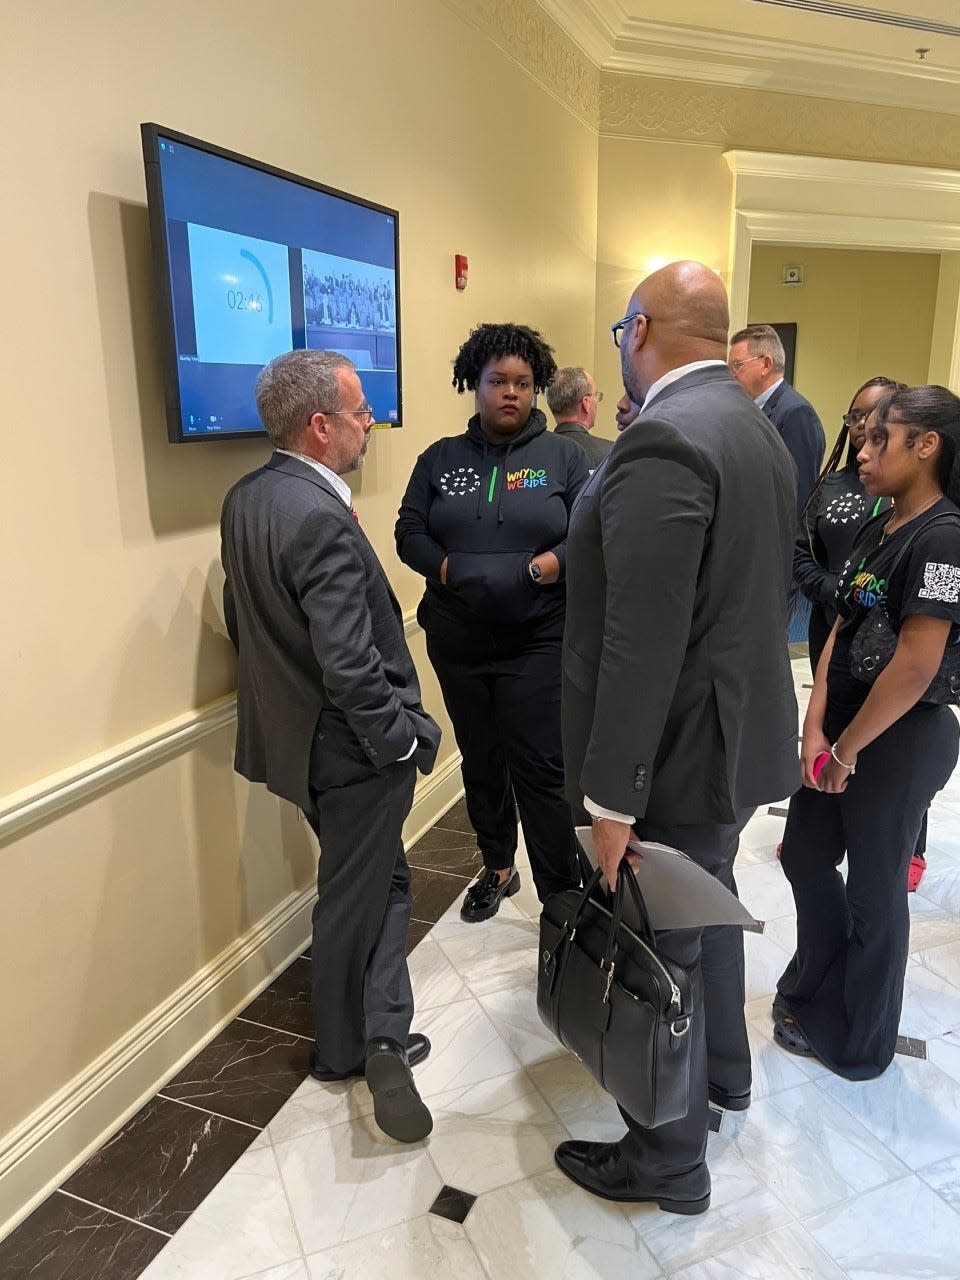 Del. William Wivell, R-Washington, speaks to members of the B-360 organization that works with young riders outside the hearing room in Annapolis on March 2, 2023. Wivell called the legislation "“a start,” during the hearing.